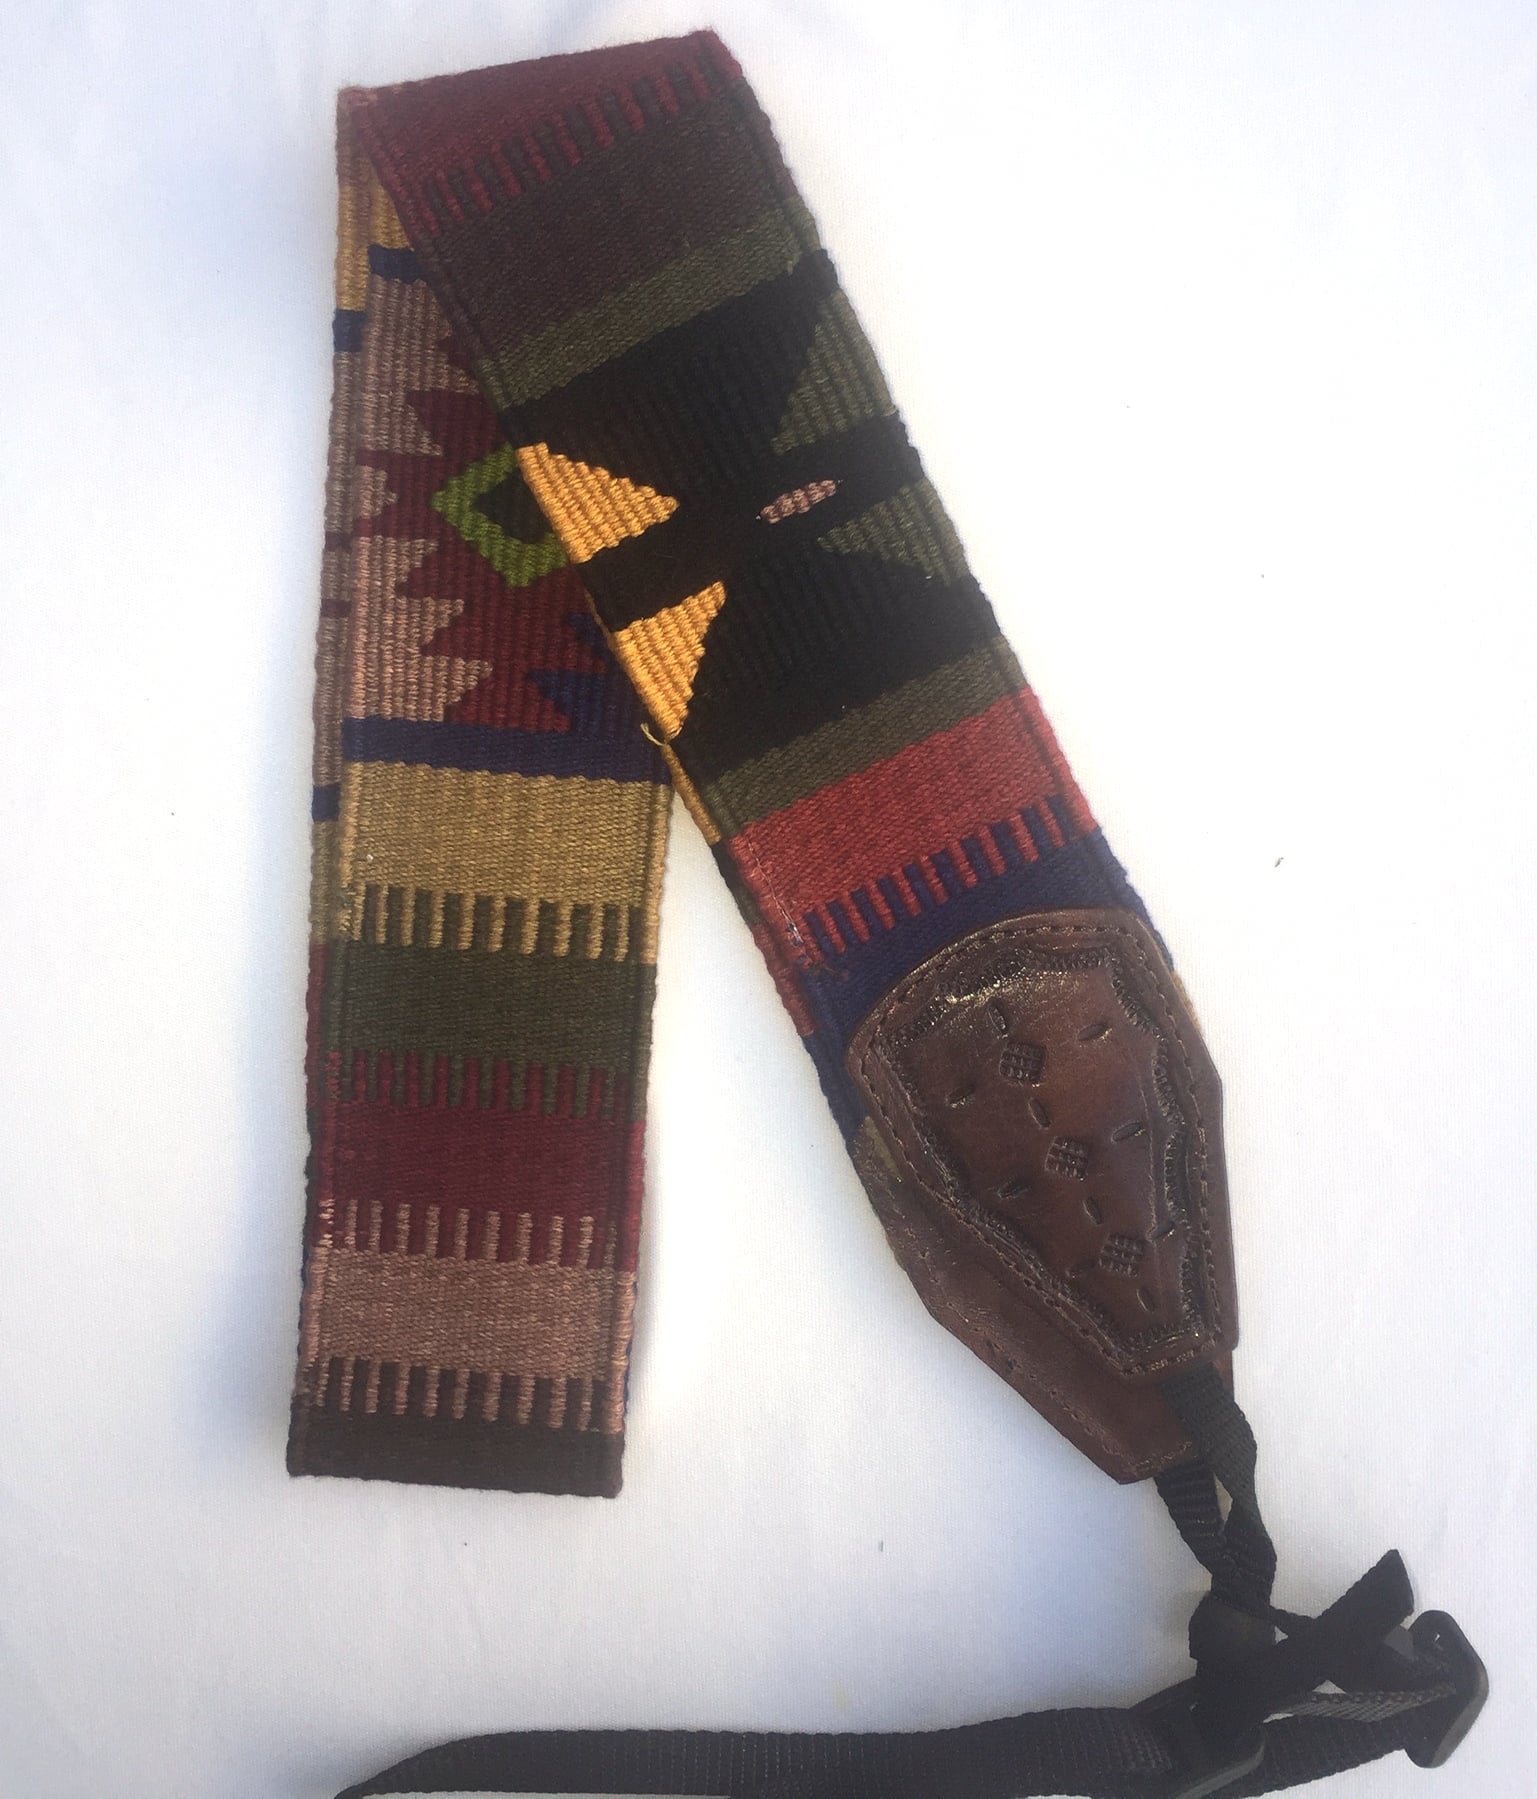 Handwoven Cotton and Leather Camera Strap - Earth Tones with Butterfly and Diamond Patterns